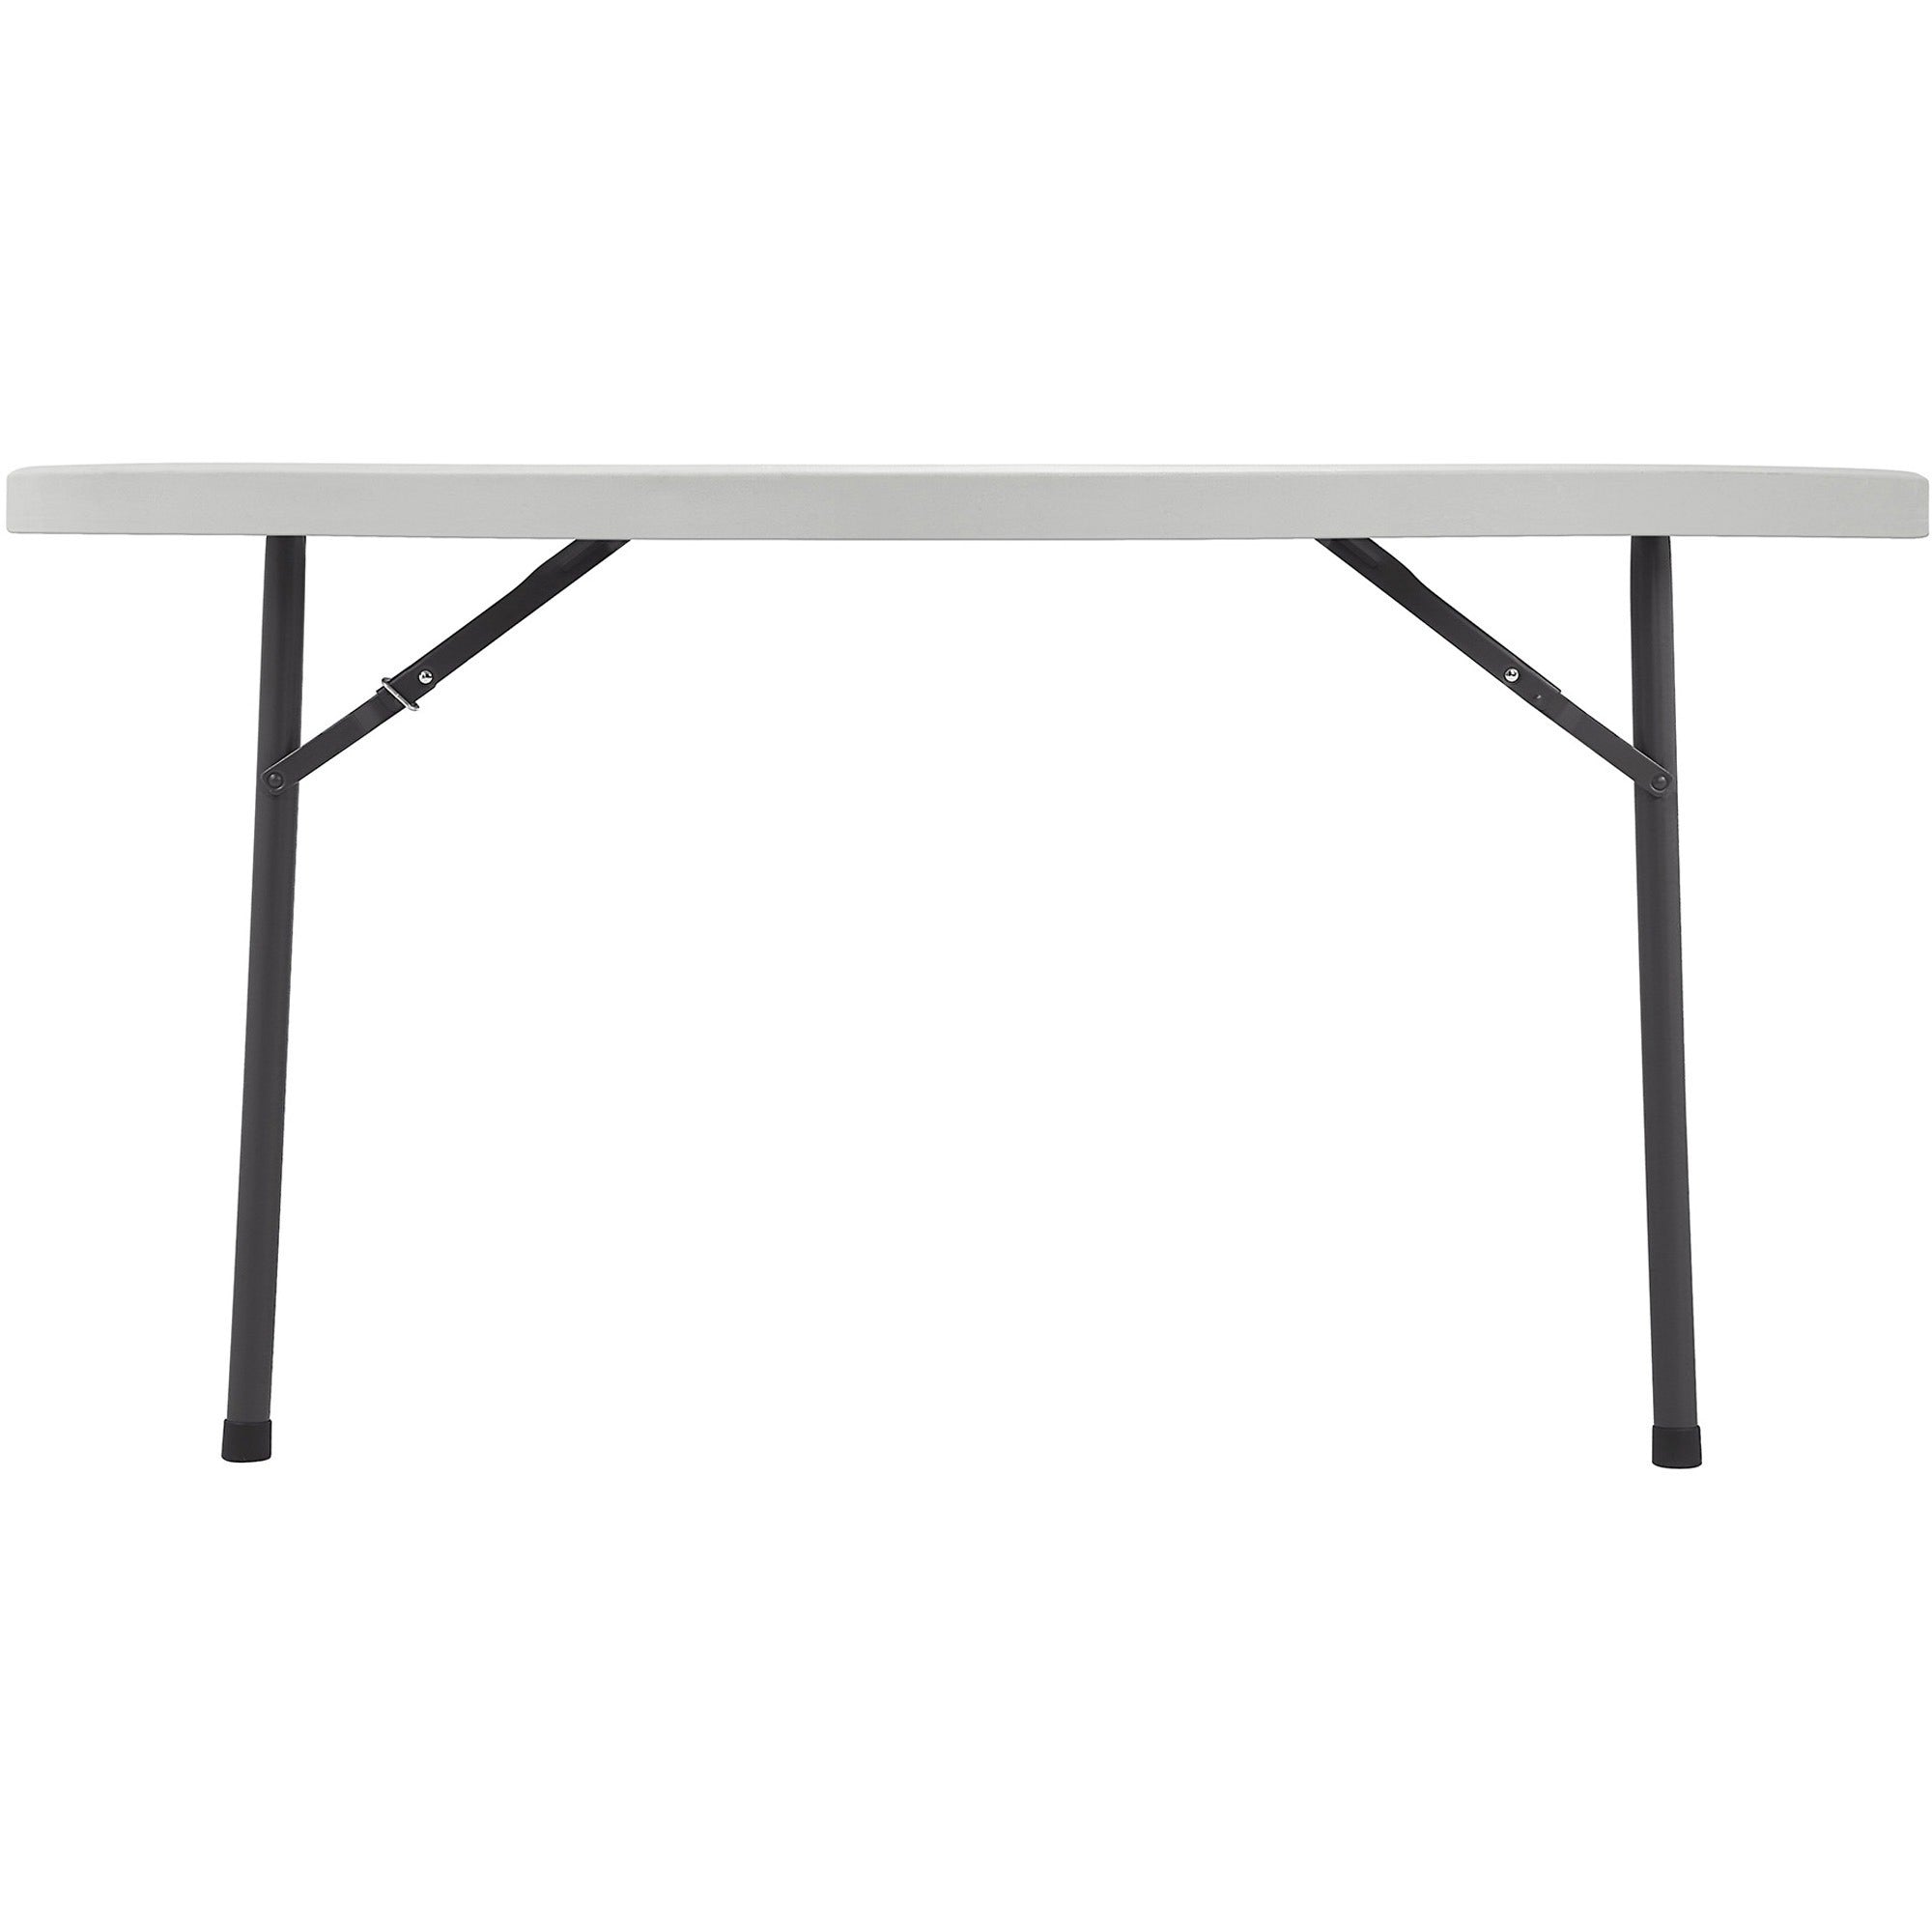 Lorell Ultra-Lite Banquet Folding Table - For - Table TopRound Top - 600 lb Capacity x 48" Table Top Diameter - 29.25" Height x 48" Width x 48" Depth - Gray, Powder Coated - 1 Each - 